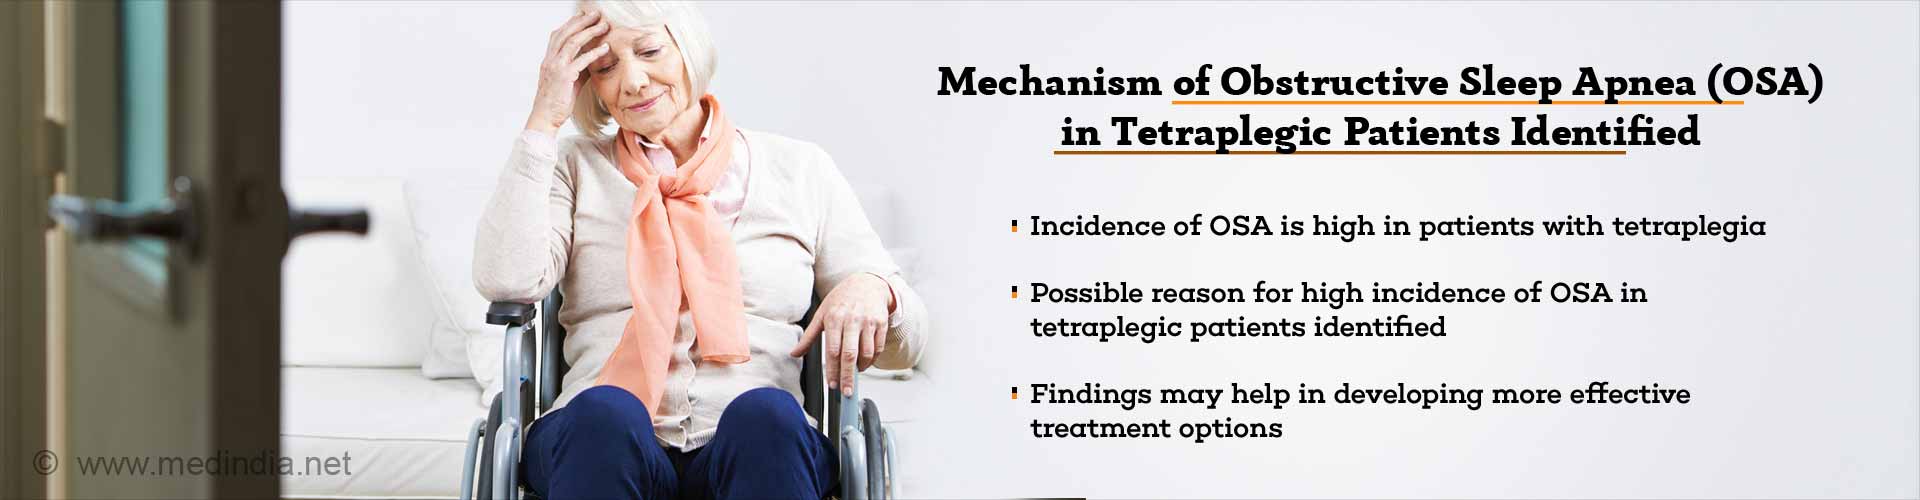 mechanism of obstrucive sleep apnea (OSA) in tetraplegic patients identified
- incidence of OSA is high in patients with tetraplegia
- possible reason for high incidence of OSA in tetraplegic patients identified
- findings may help in developing more effective treatment options